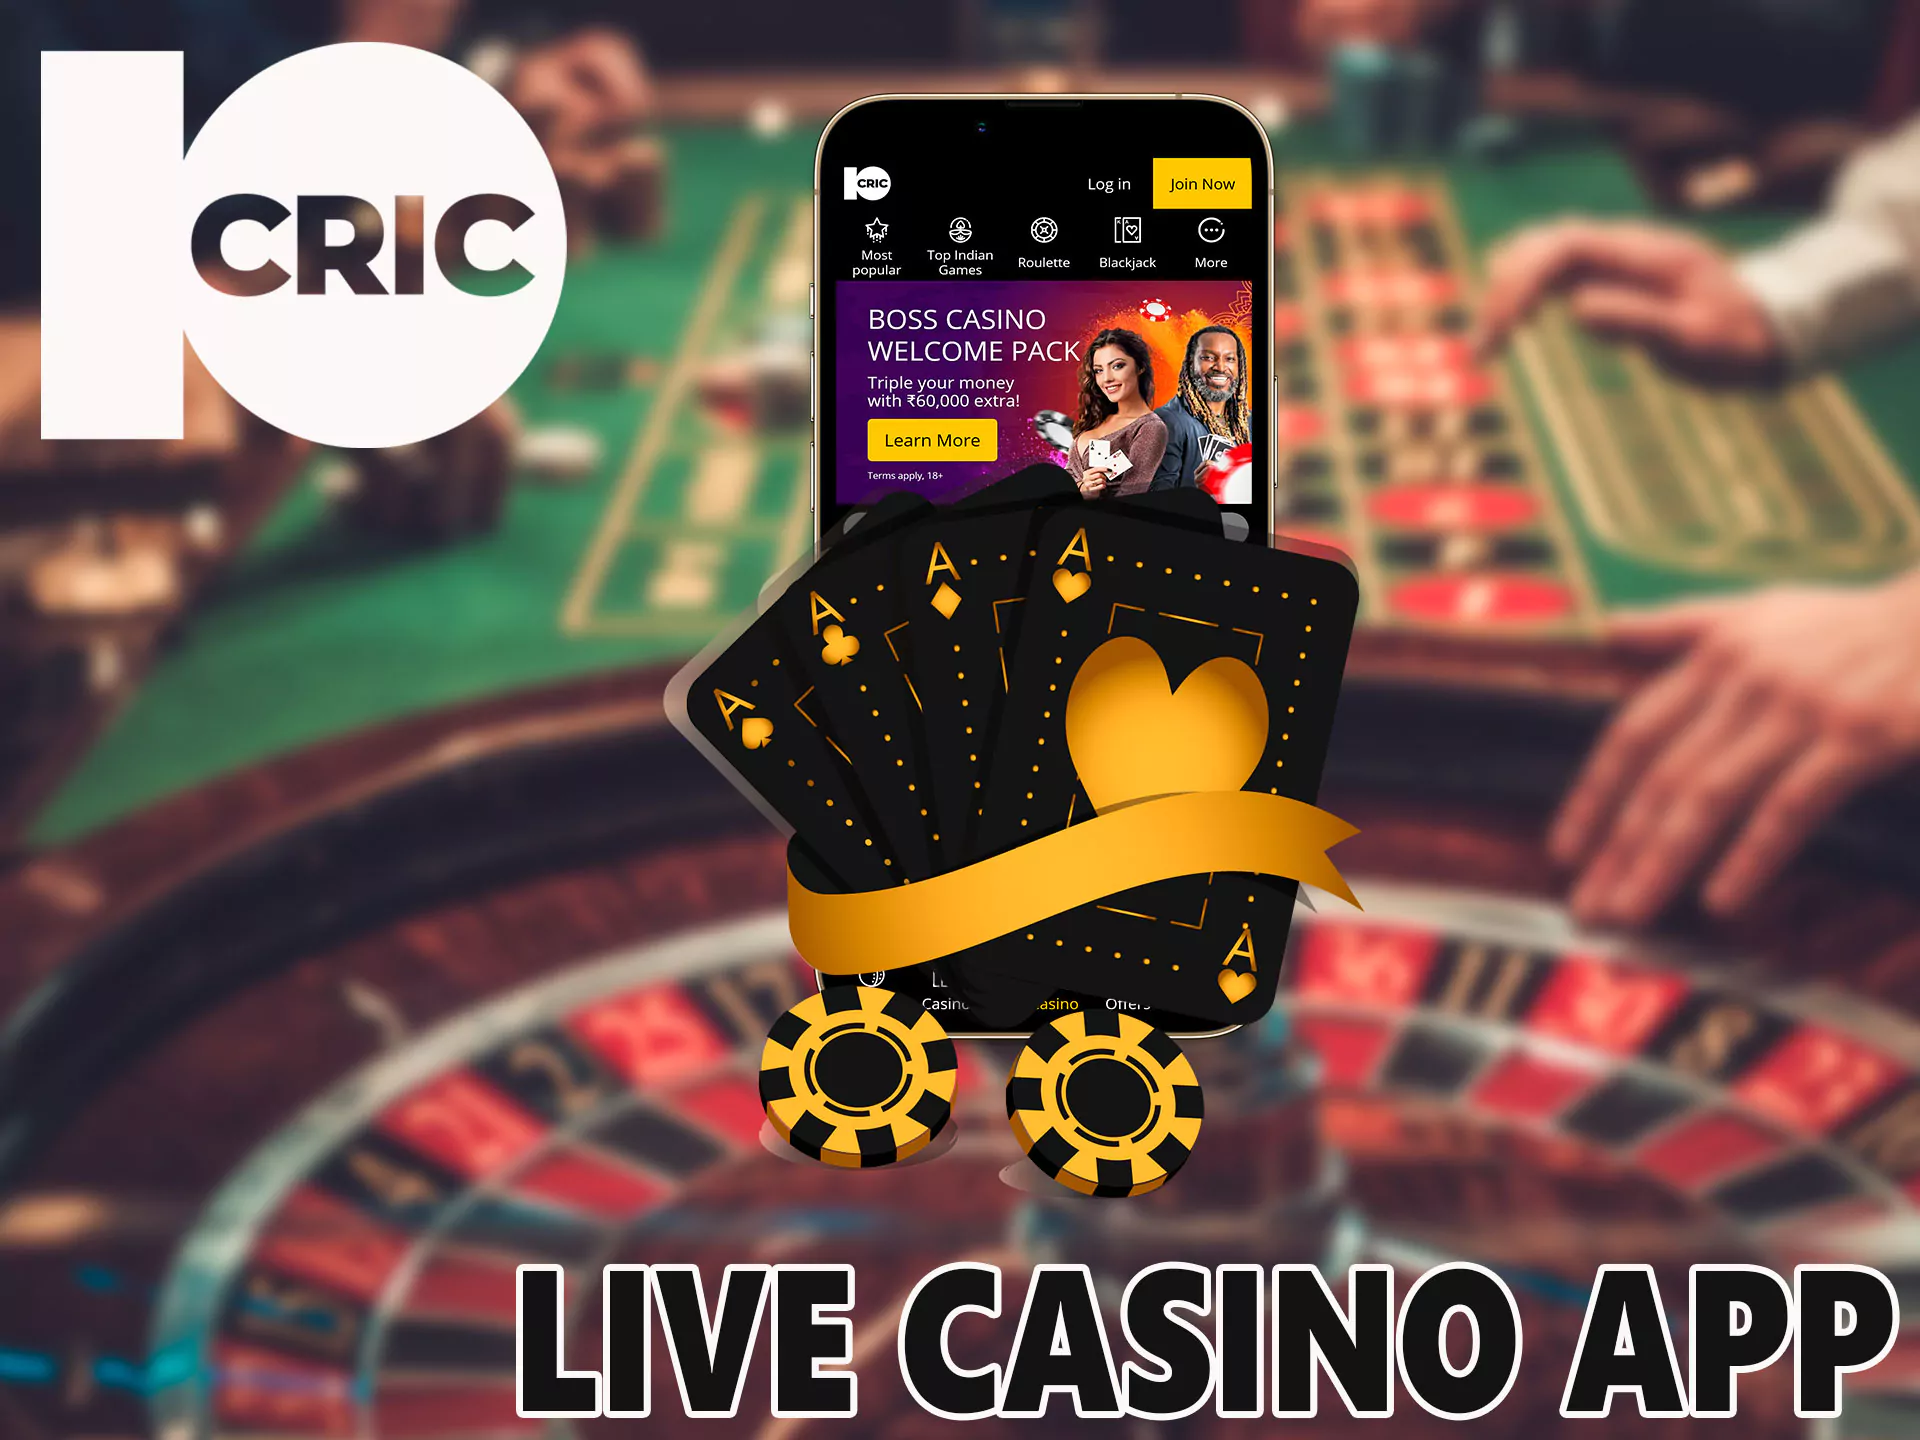 Each user of the 10Cric application has the opportunity to play with live dealers and win jackpots on their smartphone.